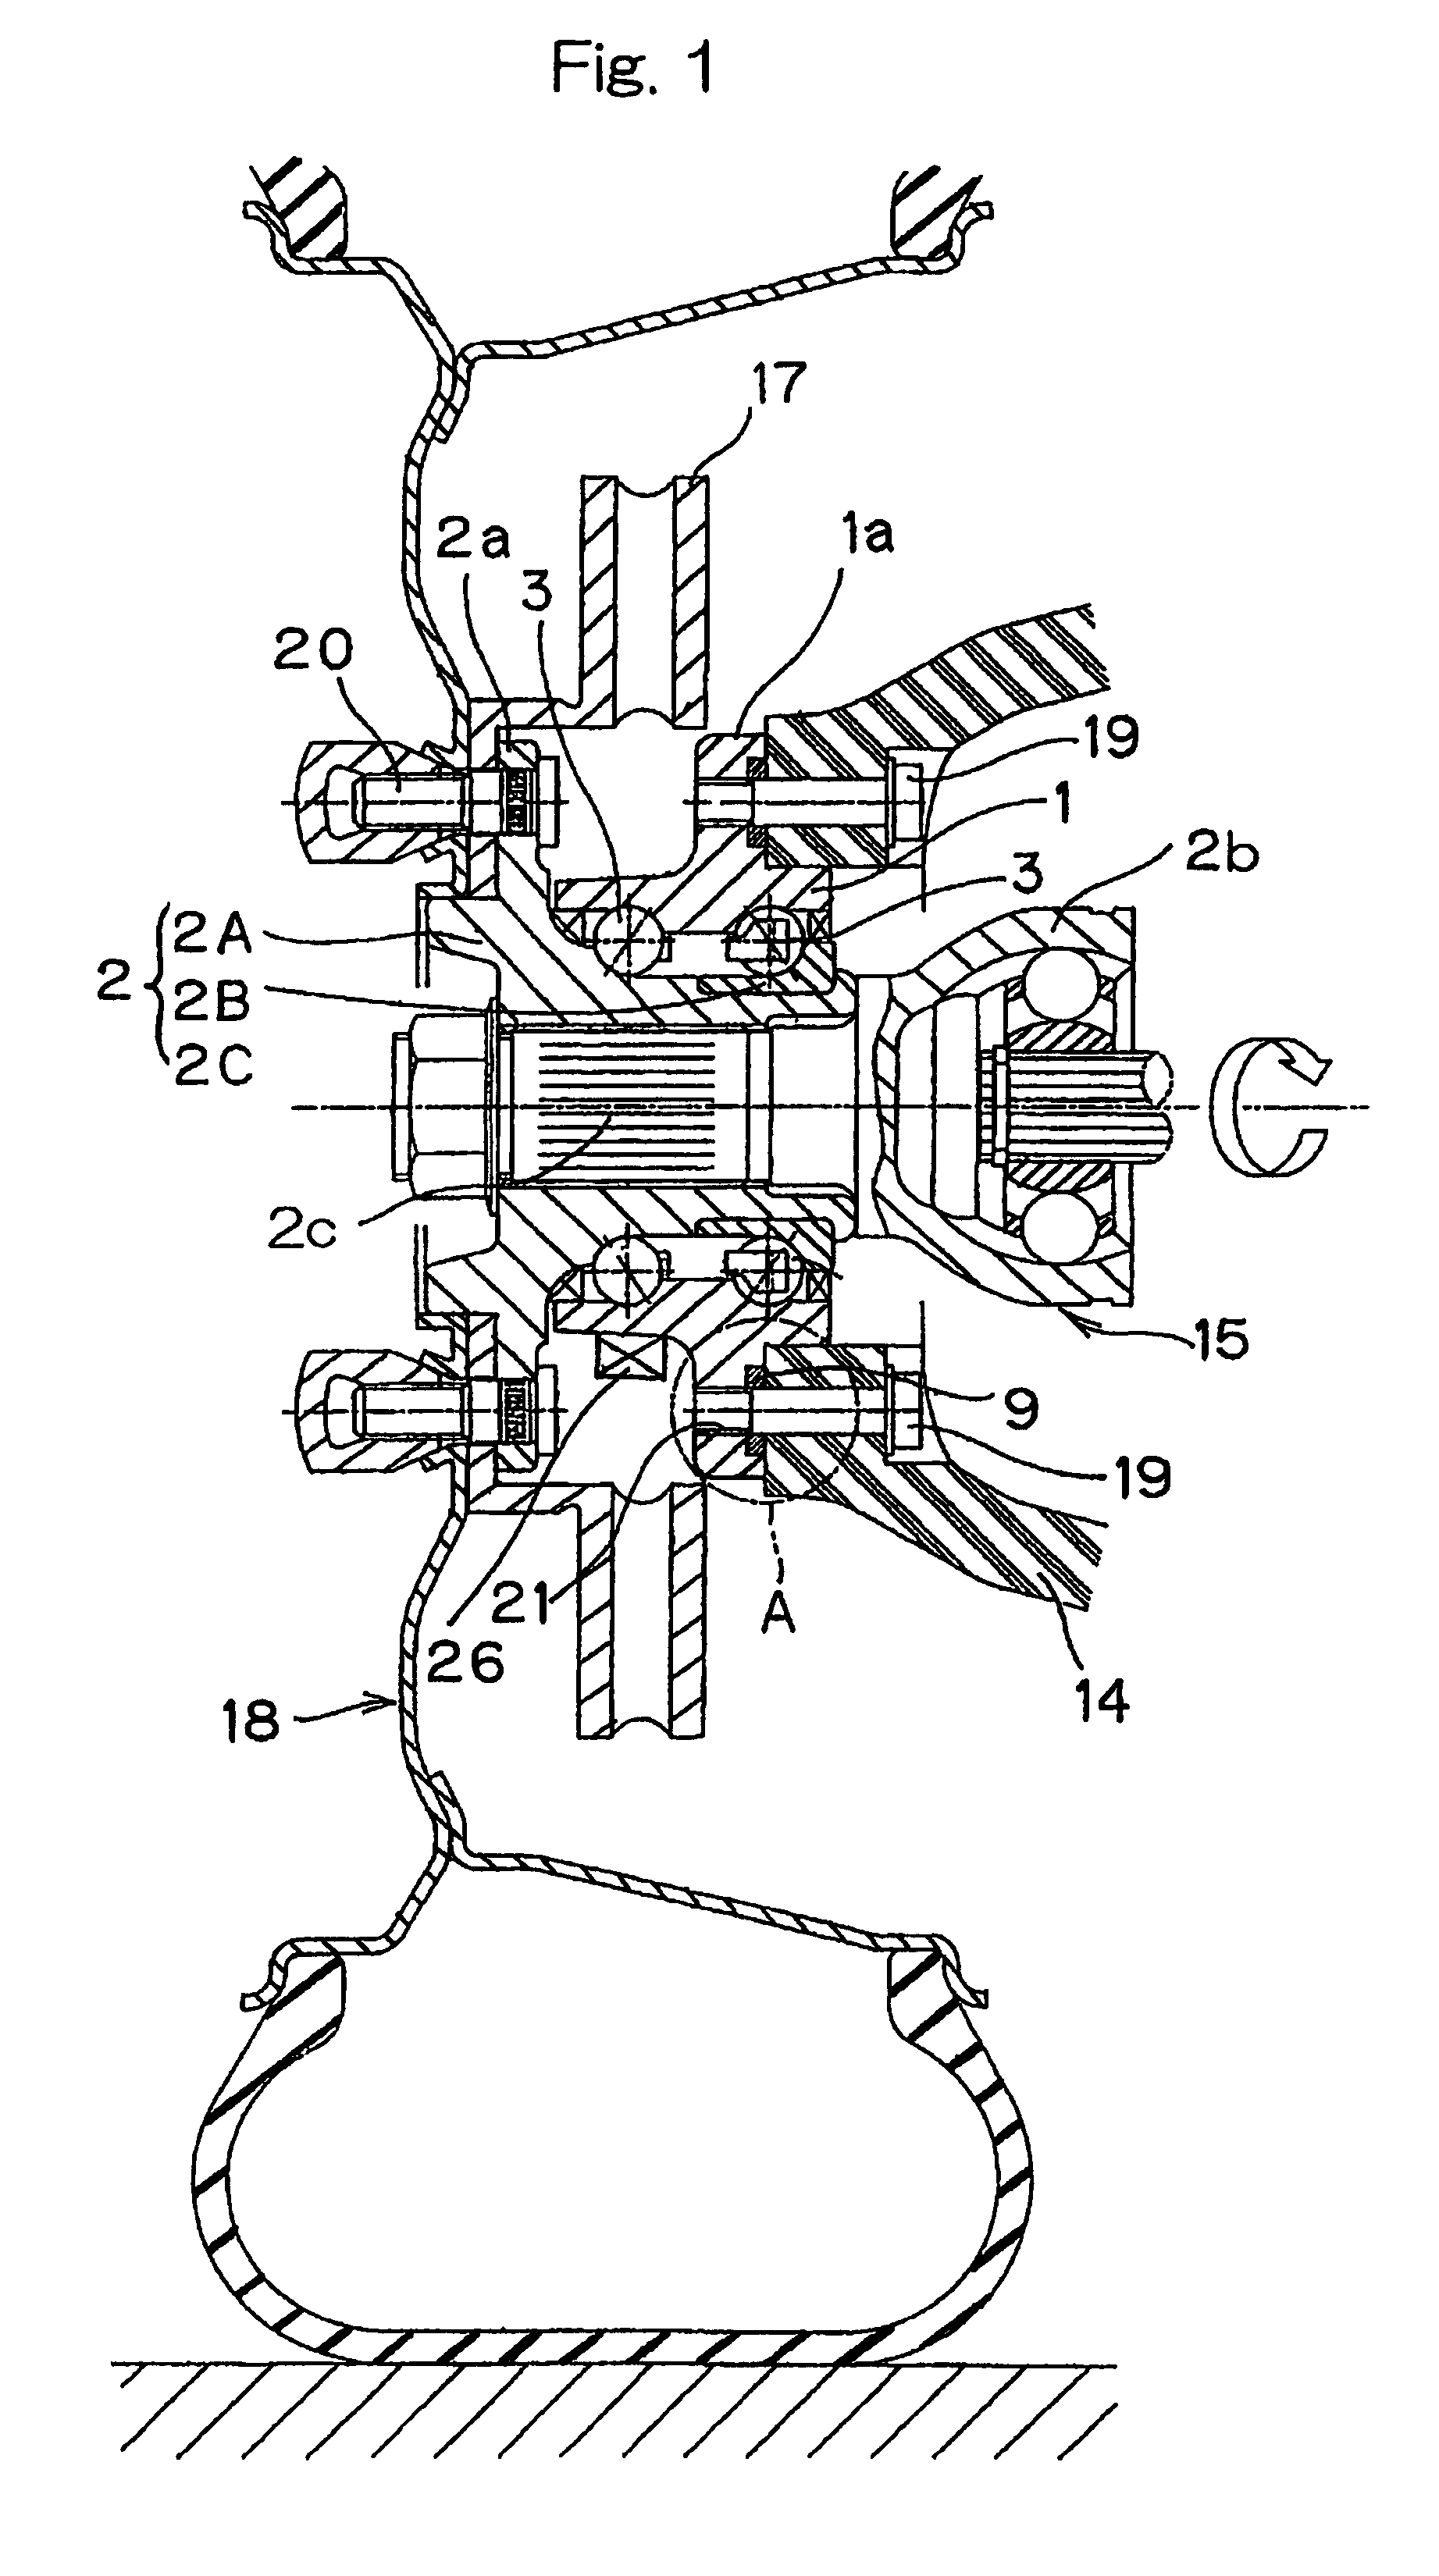 Sensor-integrated wheel support bearing assembly